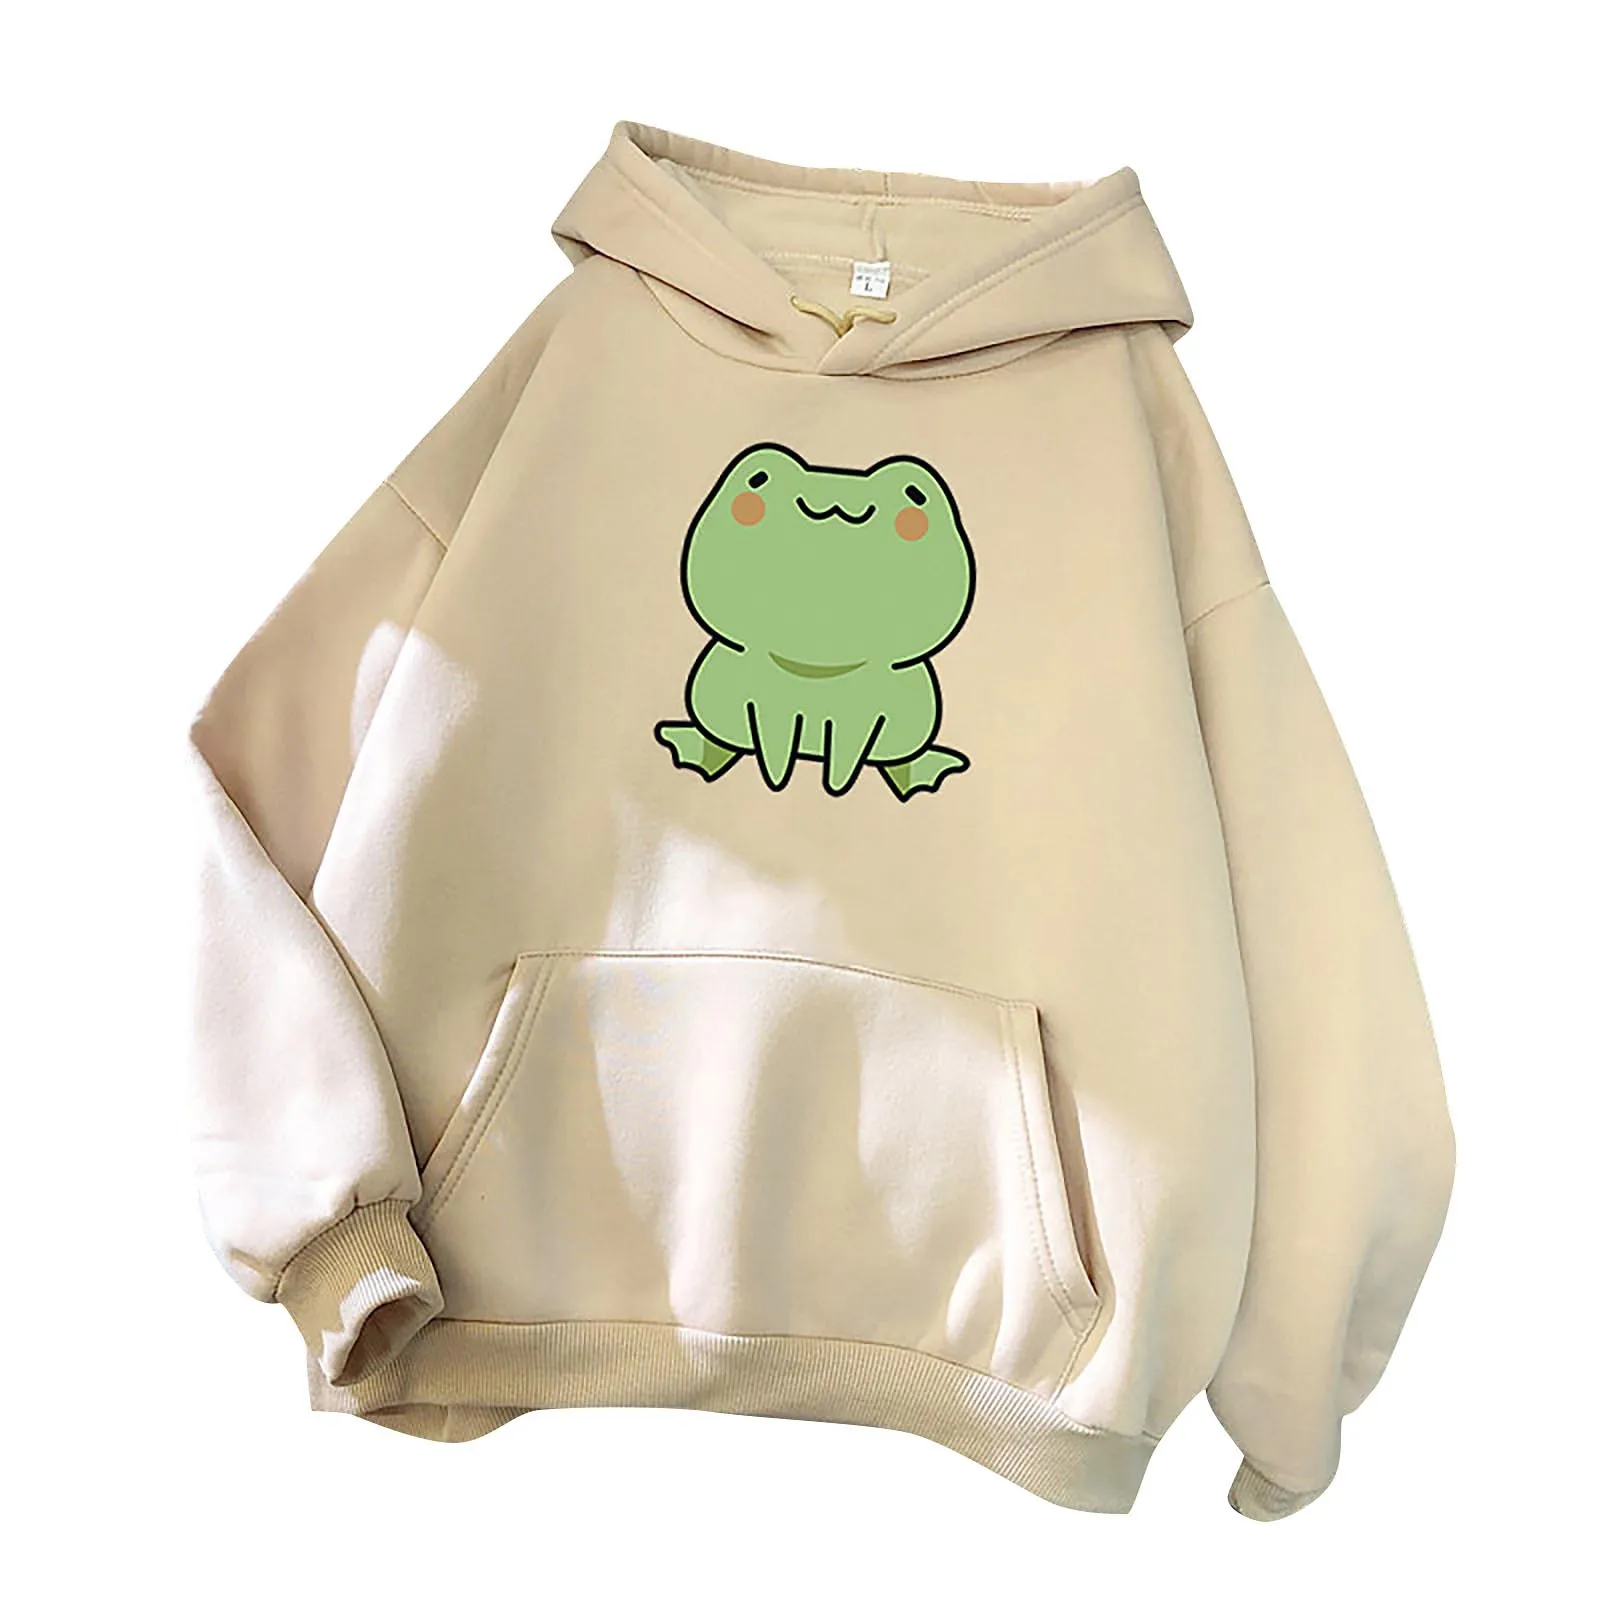 Aiouios Tops for Women Loose Fit Hoodies for Women Pullover Graphic Cute Cartoon Frog Blouses Long Sleeve Sweatshirts 